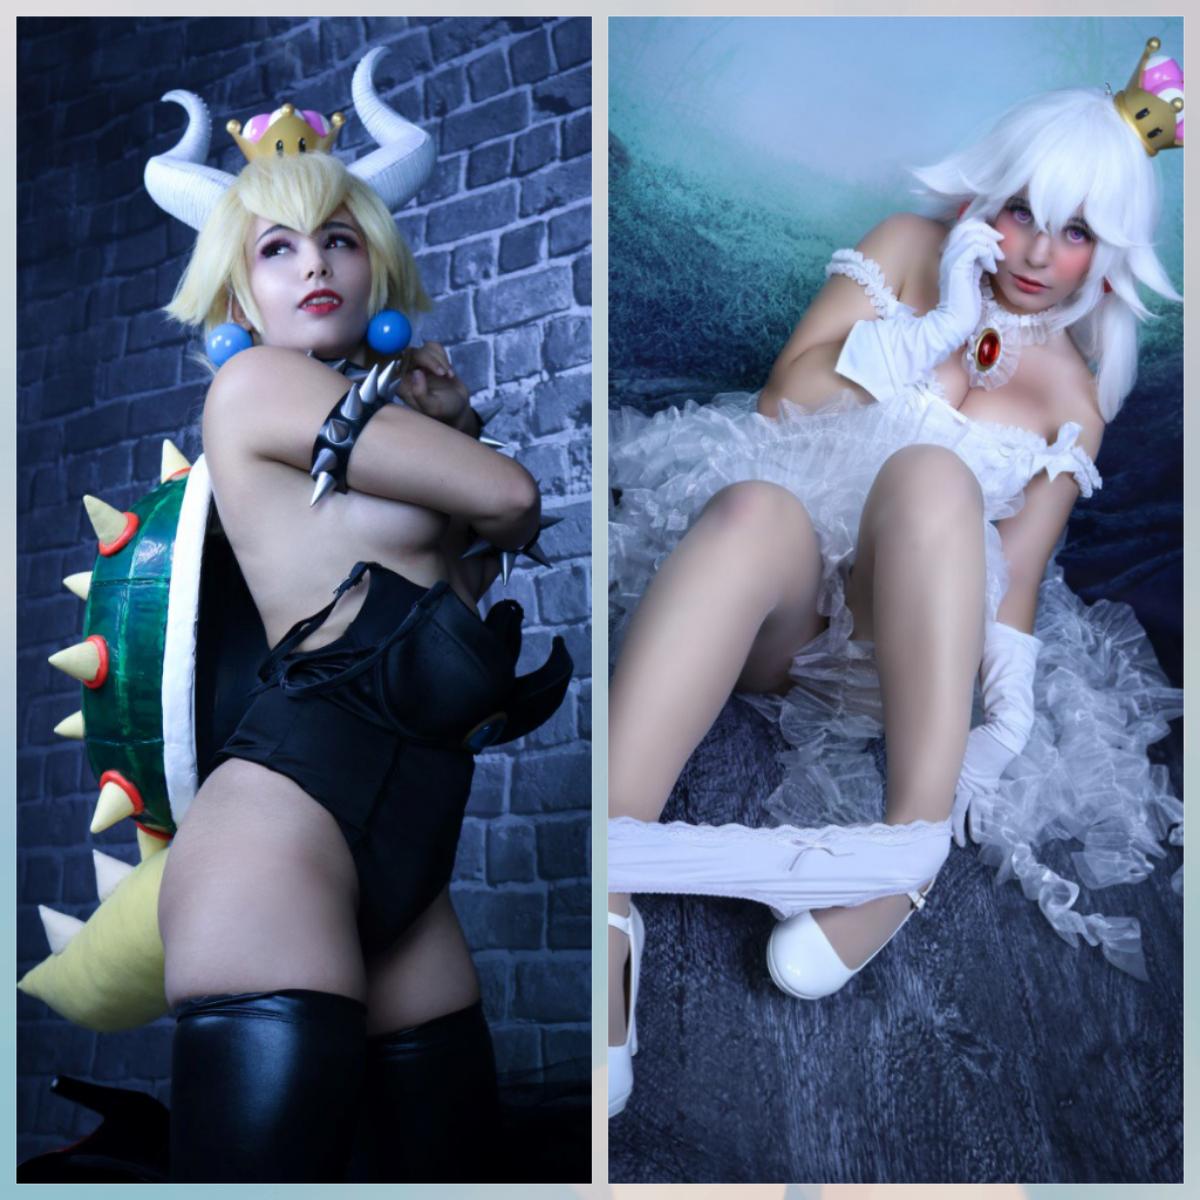 Who Would You Rather Date Bowsette Oder Booette By Gunaretta And Lysand